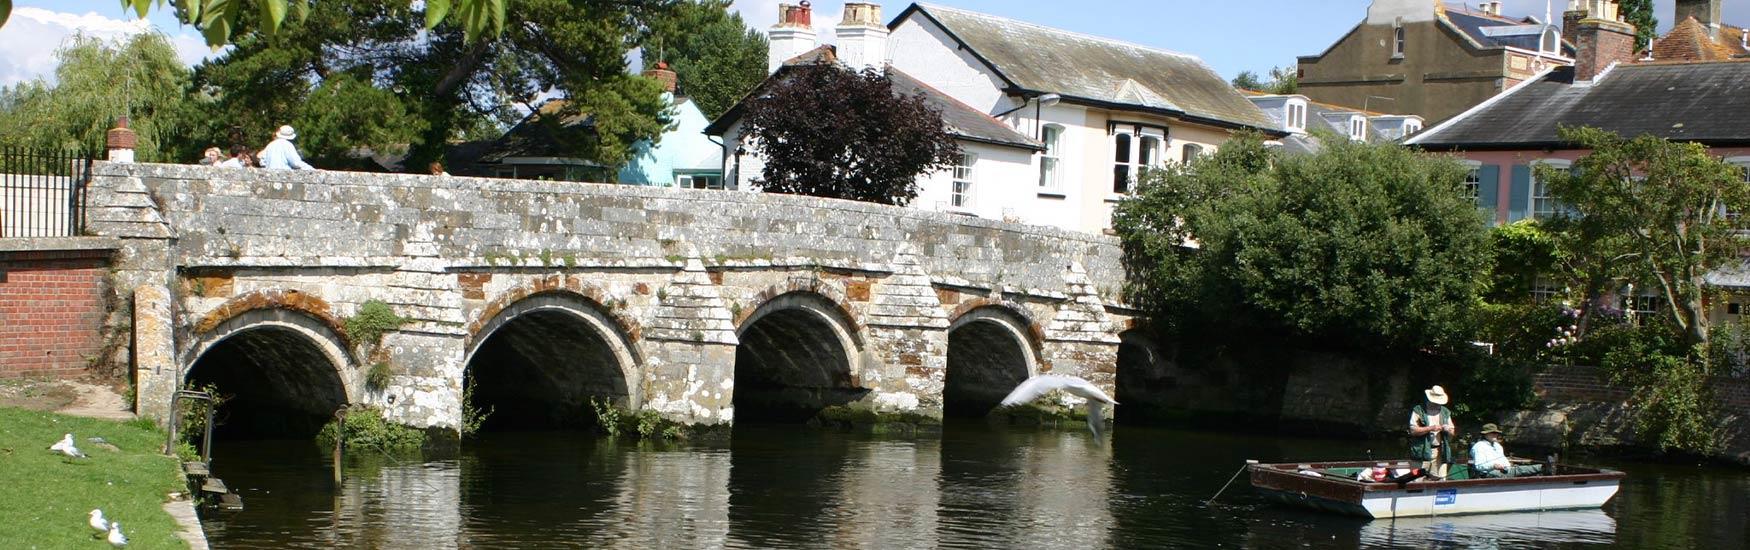 Christchurch stone bridge basking in the summer sun with two men fishing in a boat